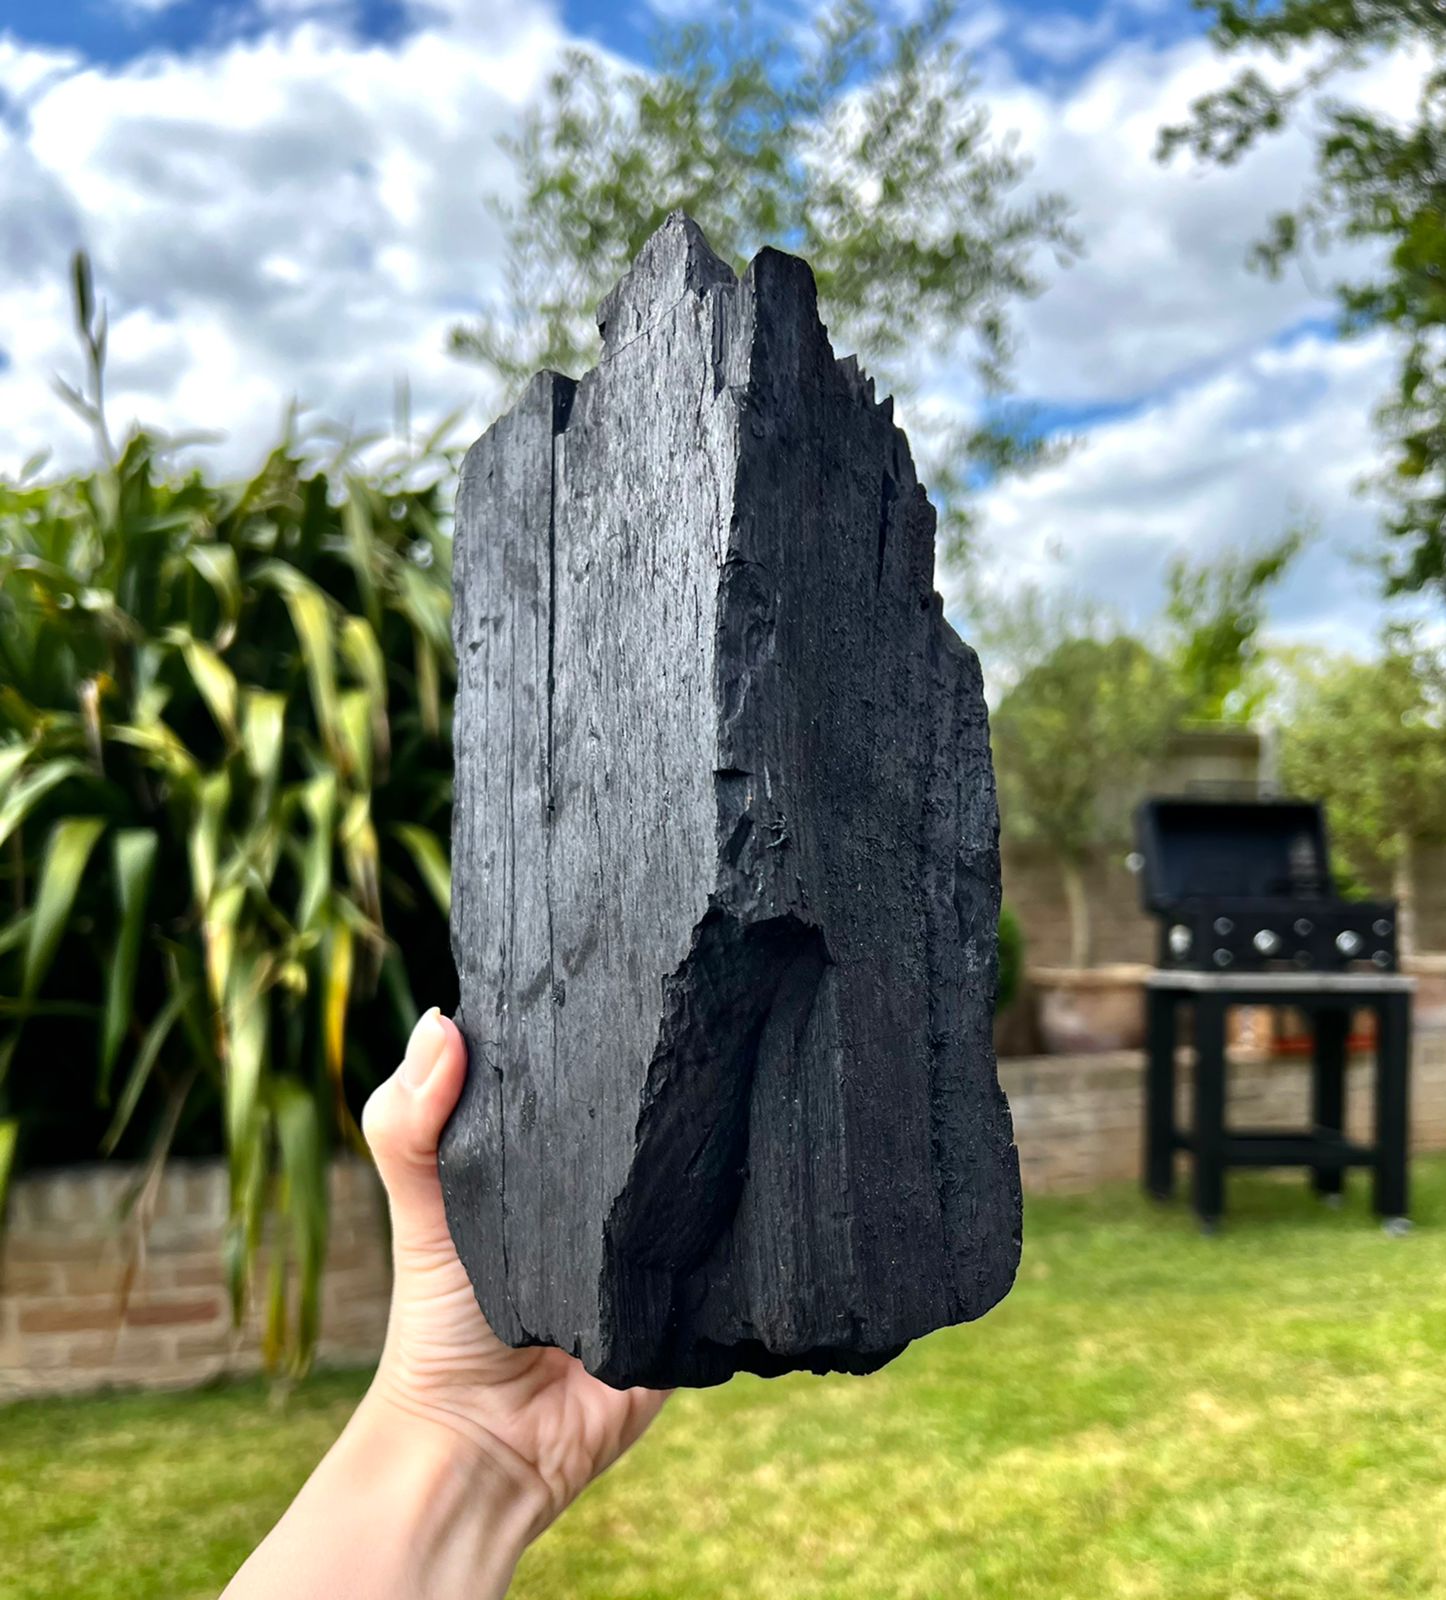 How to choose the right charcoal and save your time?